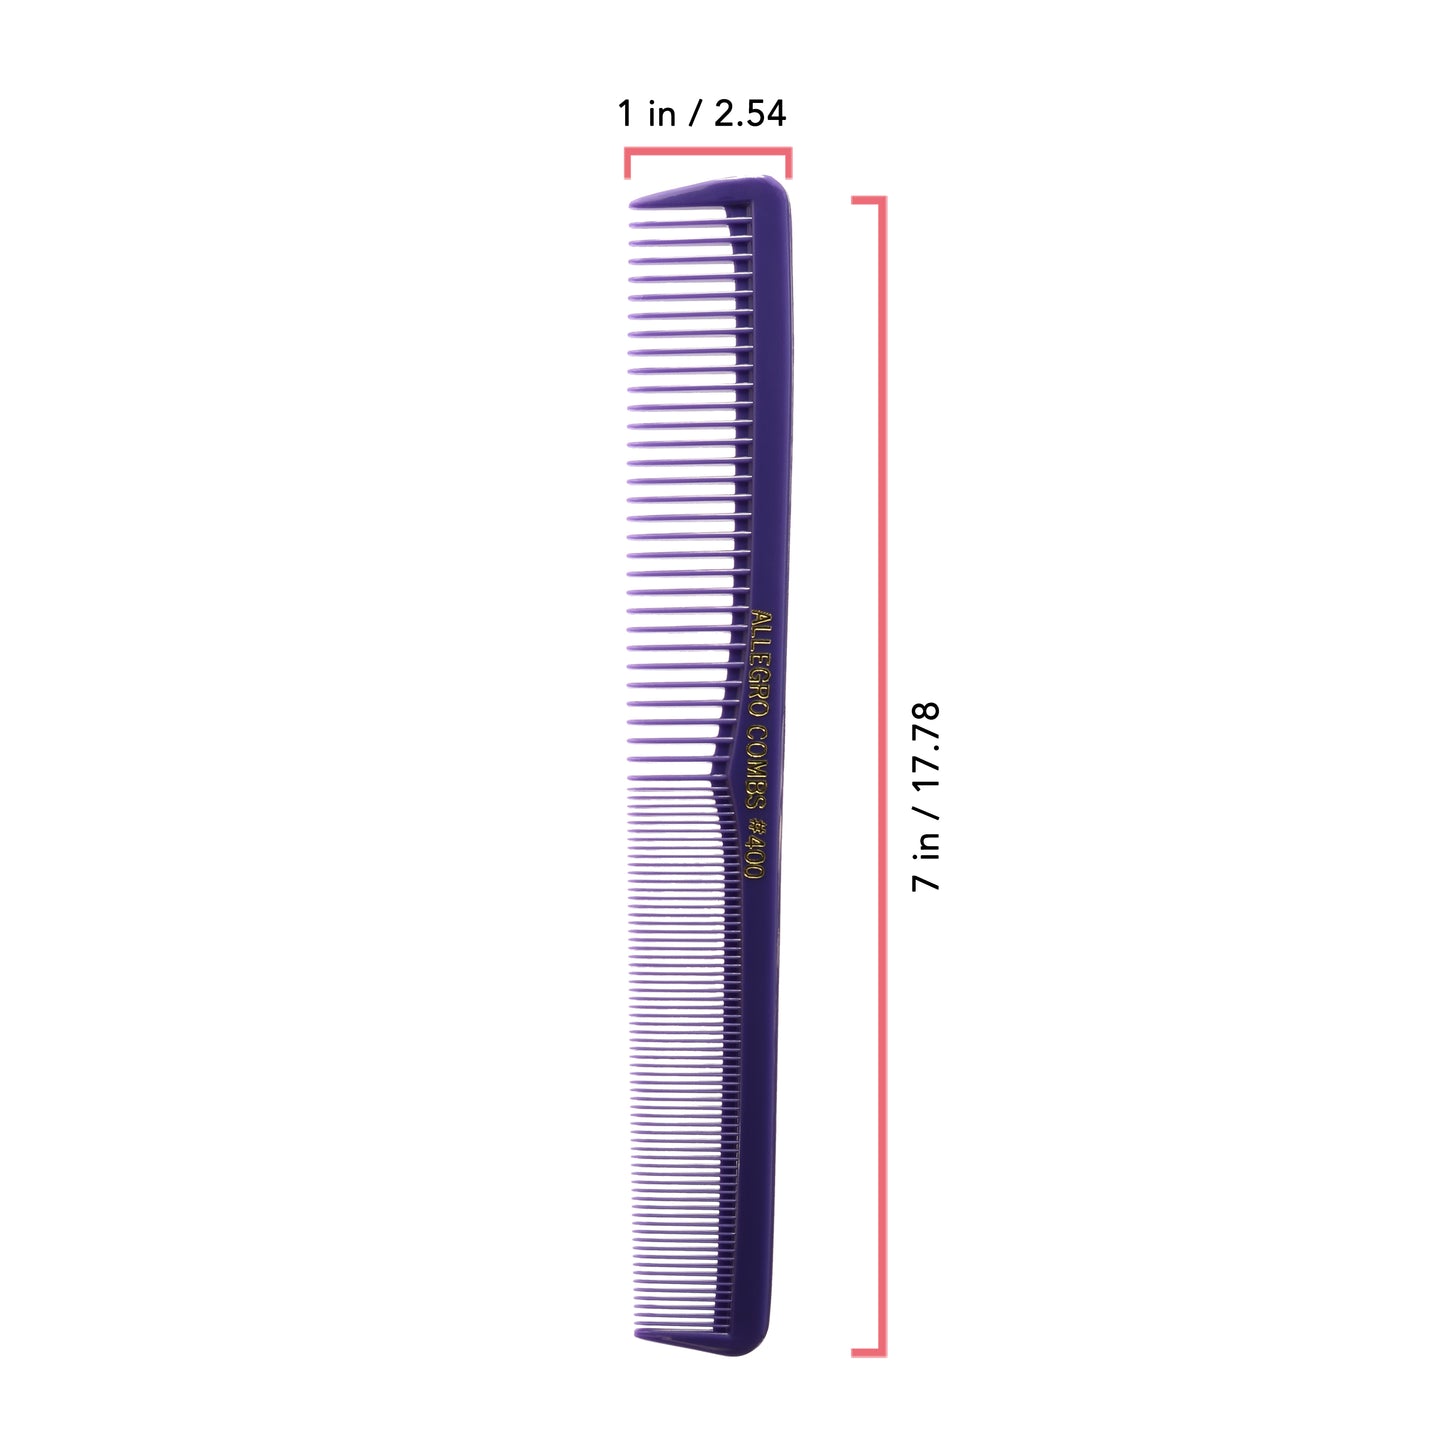 Allegro Combs 400 Hair Combs Barber Comb Set Hair Cutting Pocket Comb For Hair Stylist Styling Comb Men’s Women’s Made In USA Purple 12 Pk.